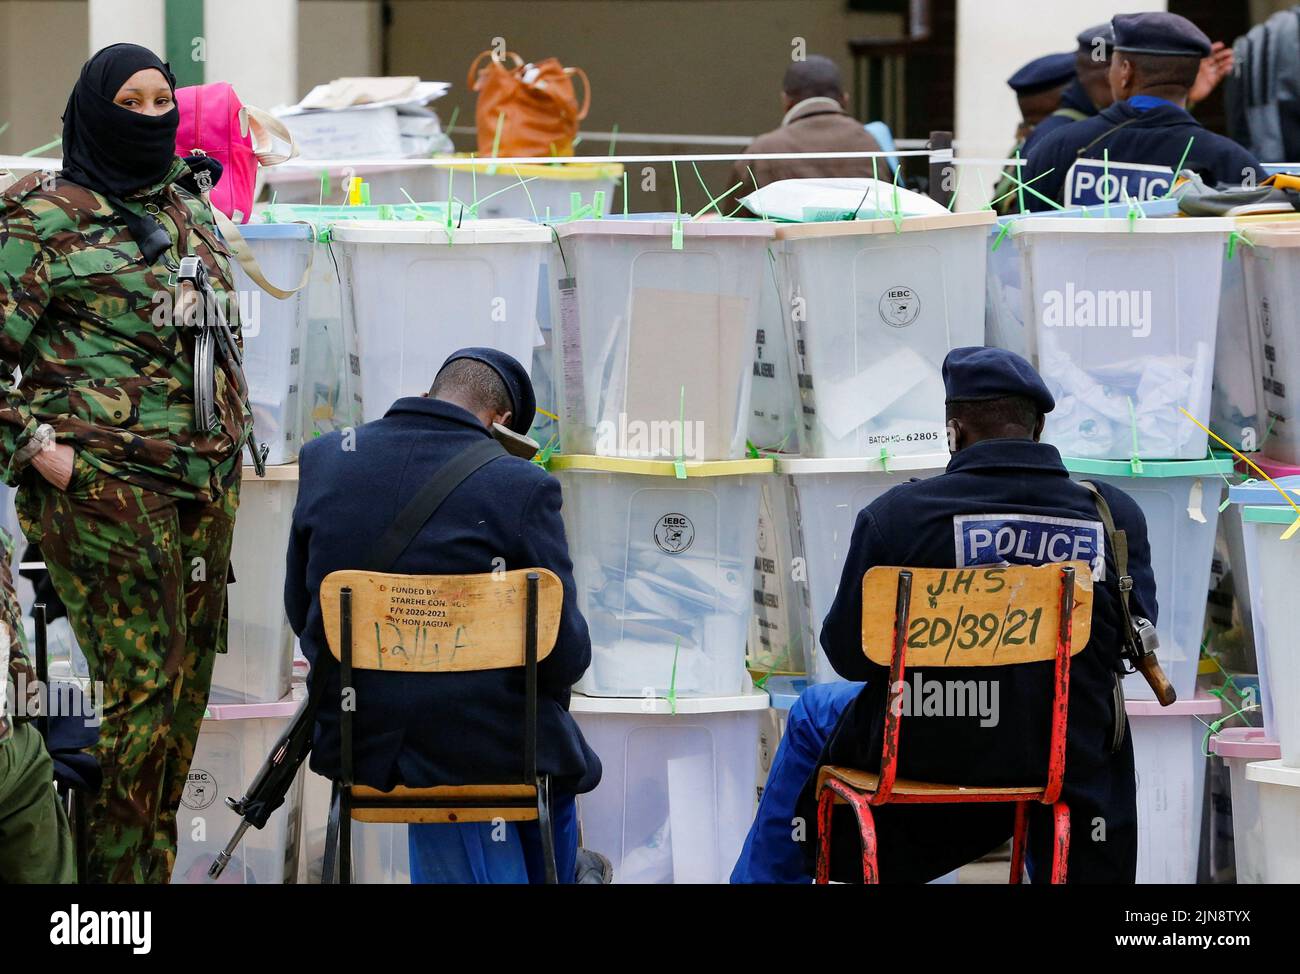 A police officer stands guard as her colleagues rest while guarding the sealed ballot boxes containing electoral materials at an Independent Electoral and Boundaries Commission (IEBC) tallying centre after the general election in Nairobi, Kenya August 10, 2022. REUTERS/Thomas Mukoya Stock Photo